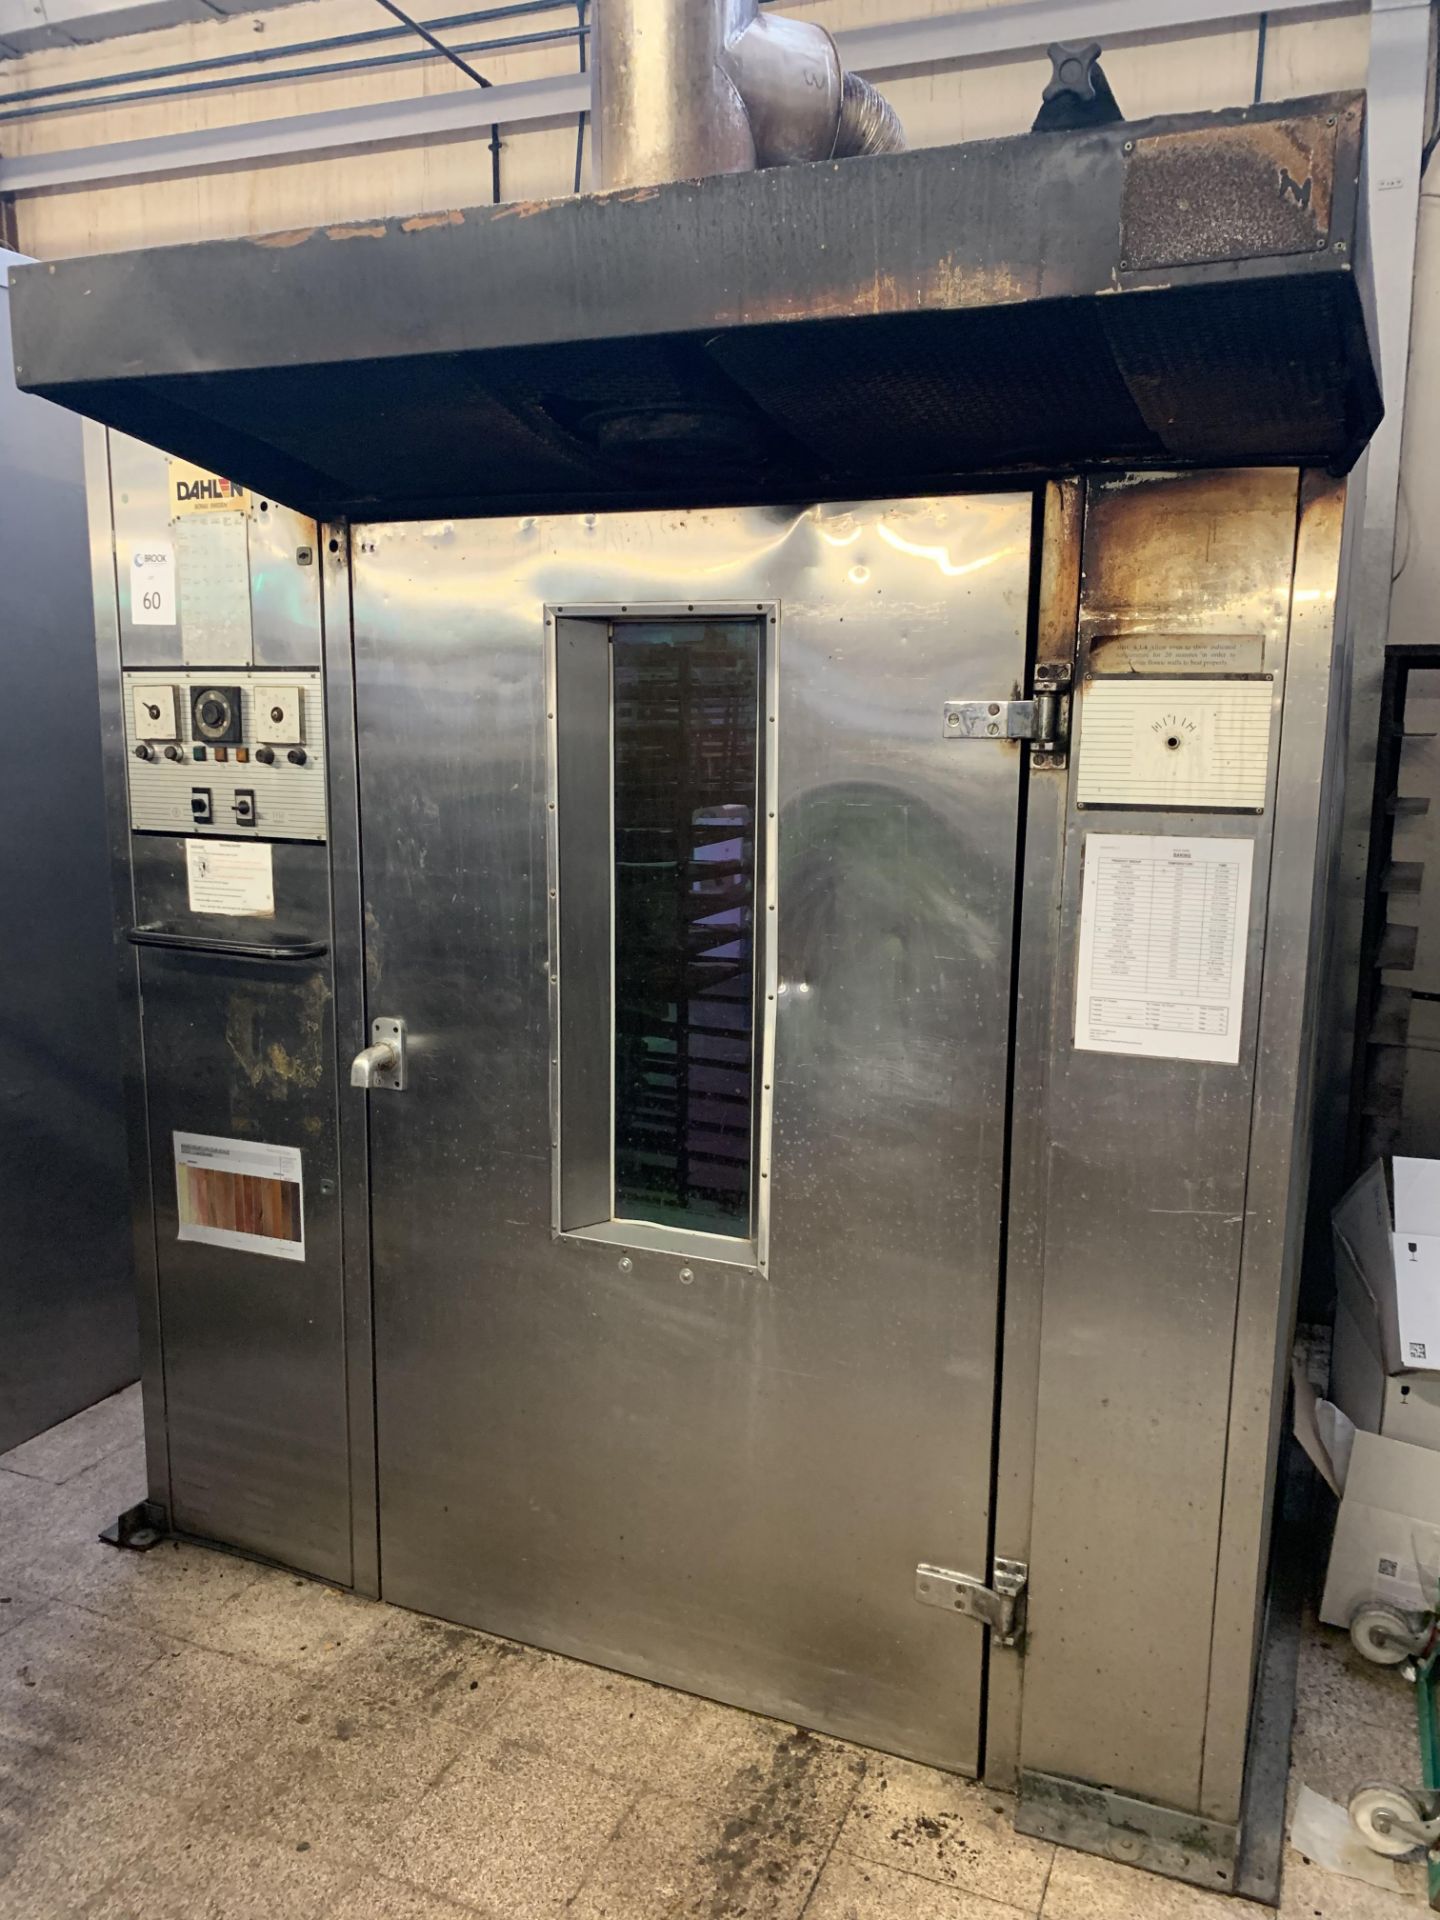 Dahlen electric fired twin rack oven complete with 2 racks customer to dismantle to remove